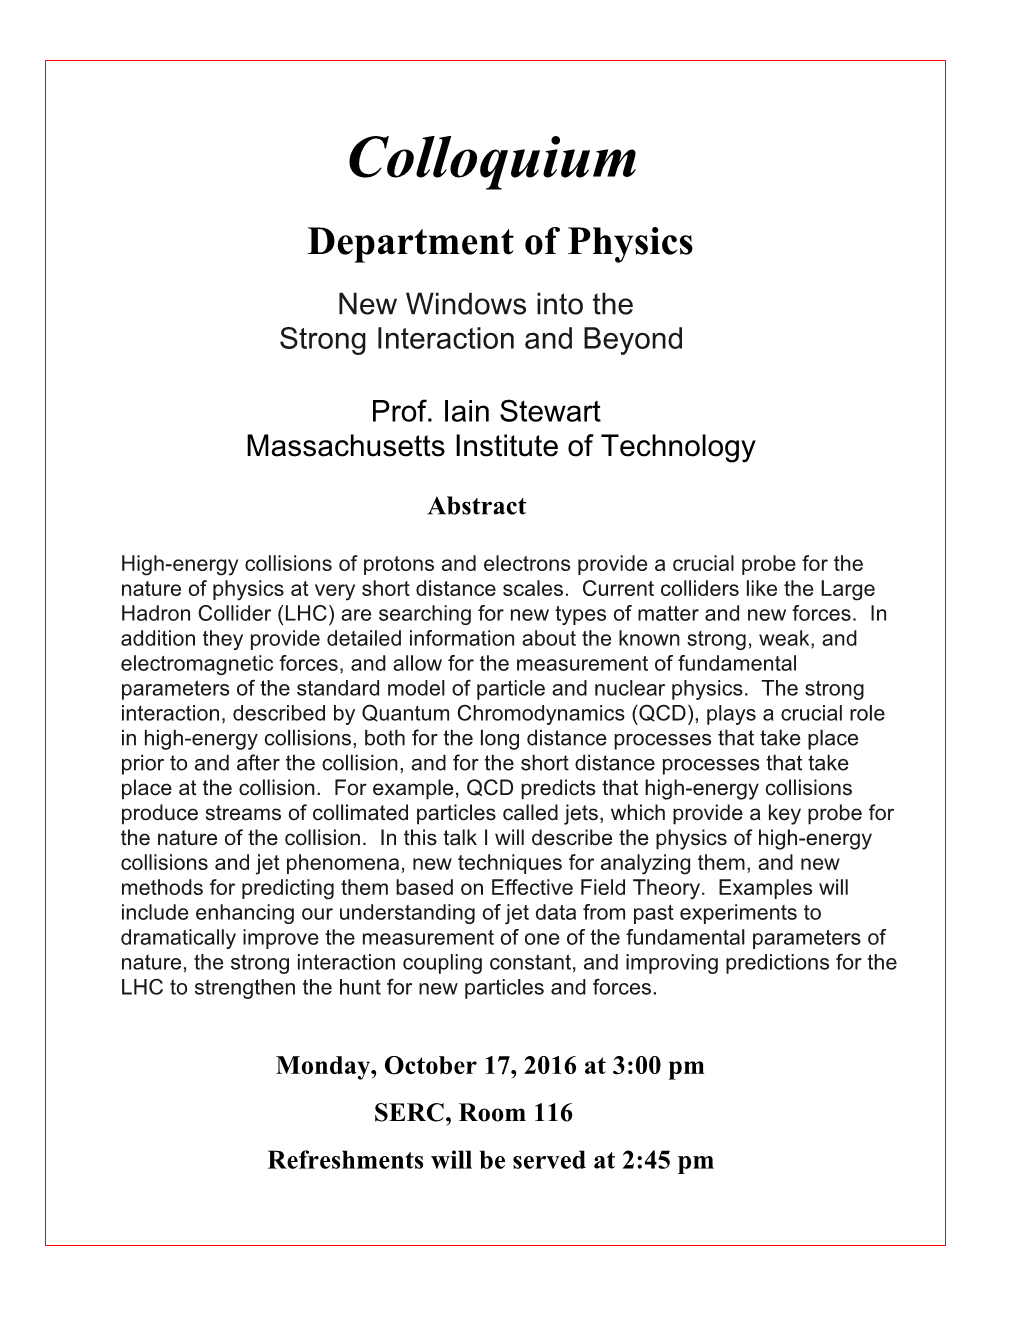 Colloquium Department of Physics New Windows Into the Strong Interaction and Beyond